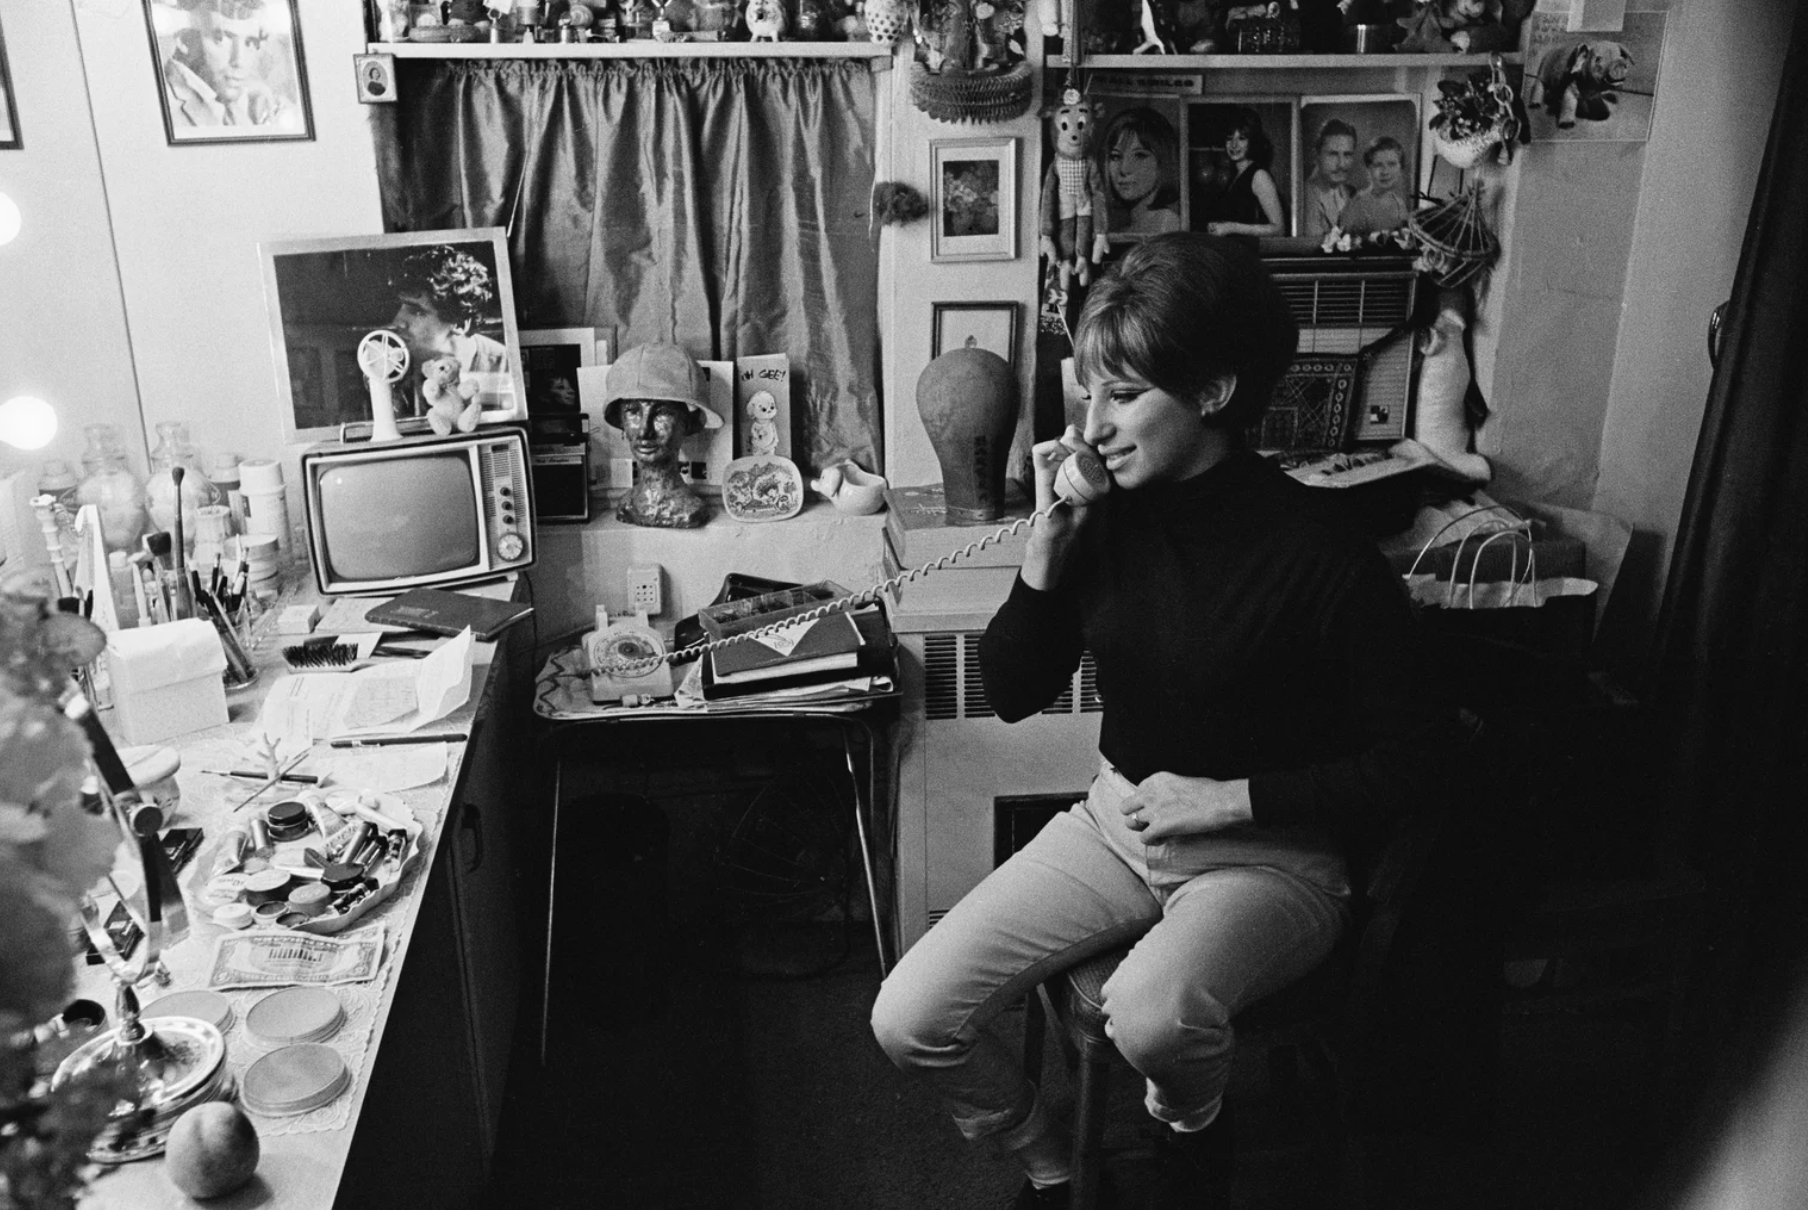 A young woman, casually dressed, talks on a landline telephone in a dressing room, a table scattered with make-up in front of her.